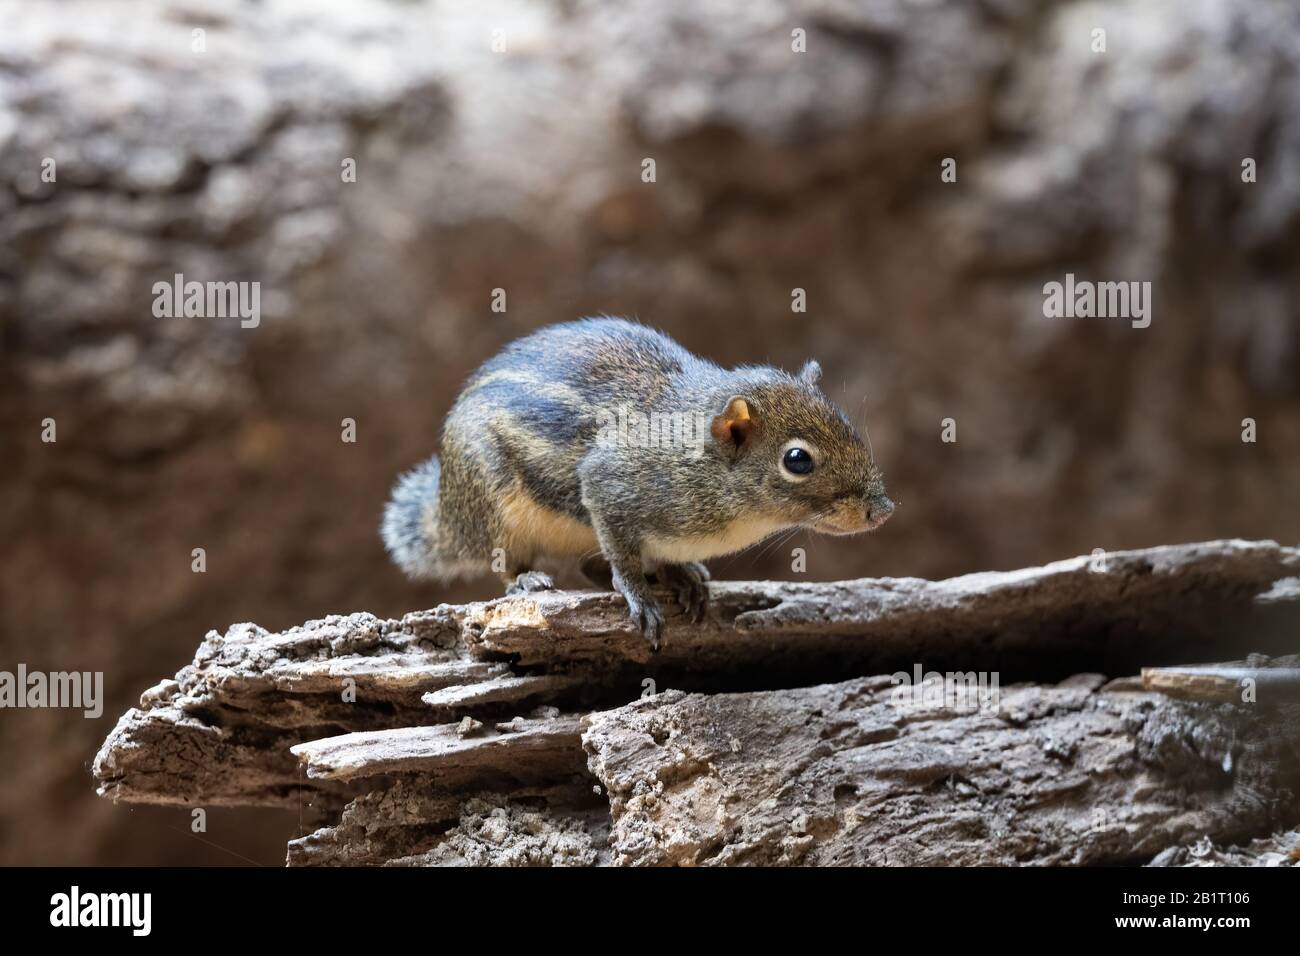 The Berdmore's ground squirrel (Menetes berdmorei) is a ground squirrel found in Southeast Asia, from the east of Myanmar to Vietnam. It is however ab Stock Photo